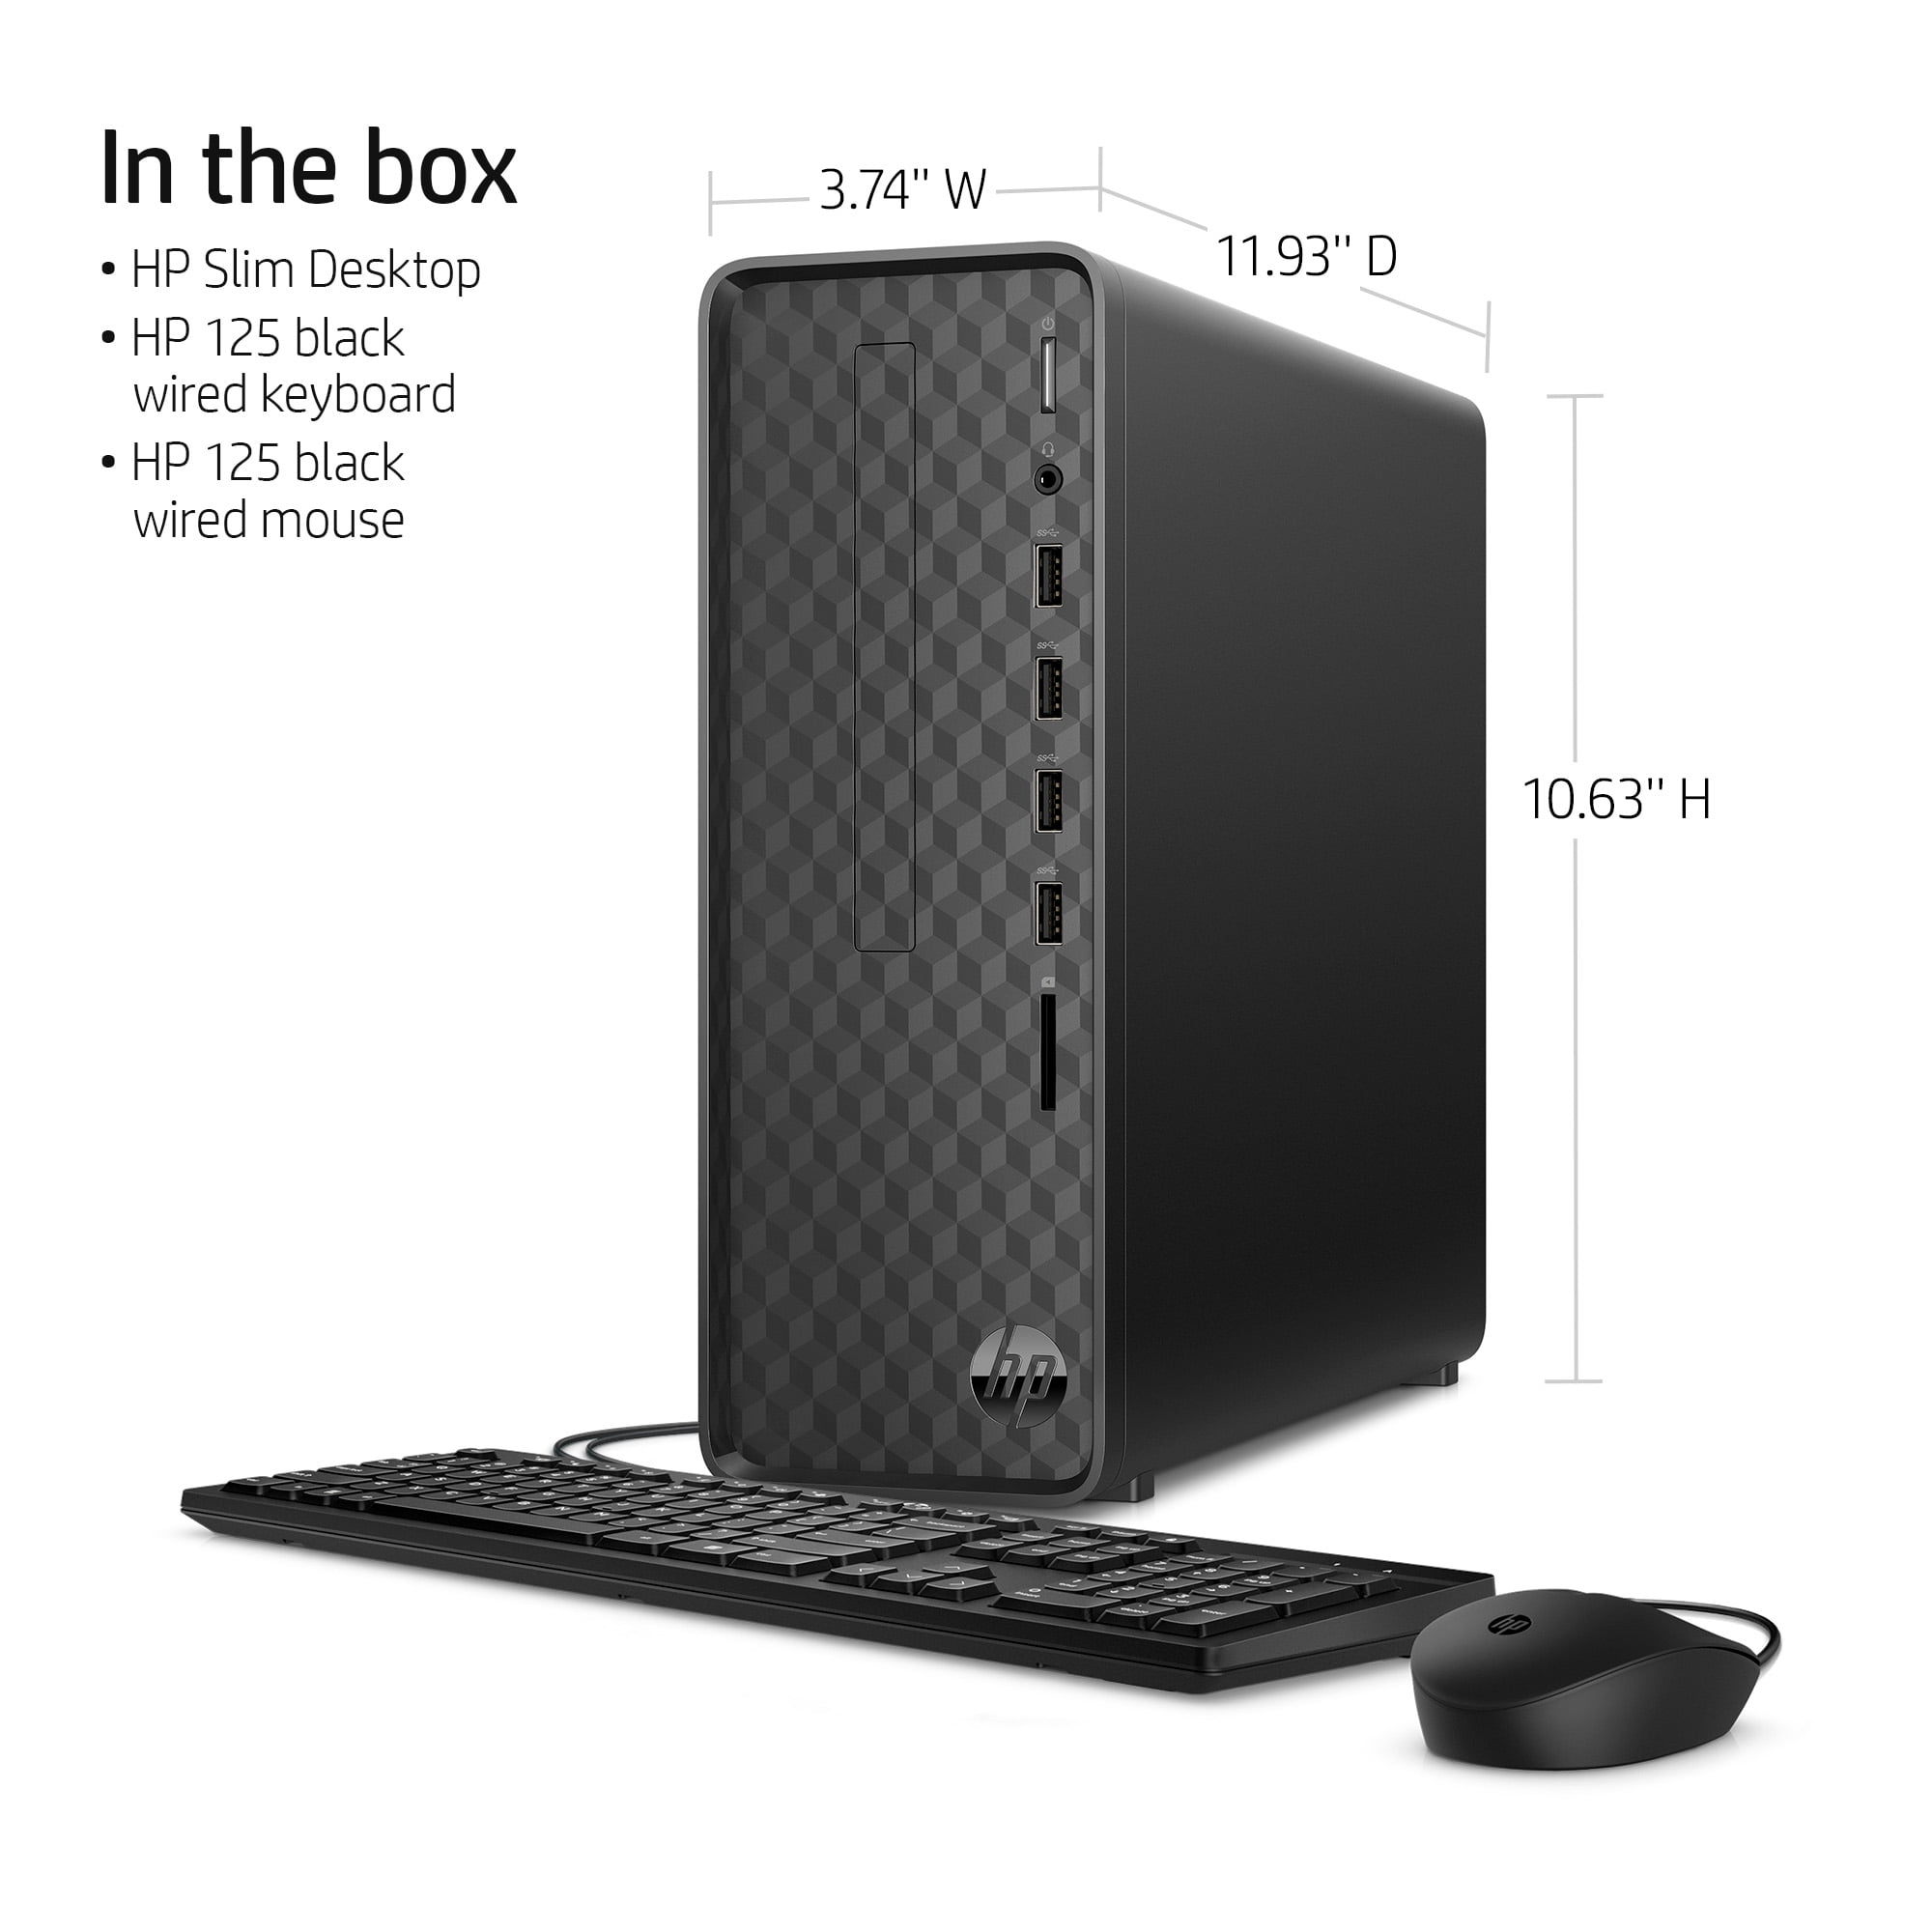 Review.IT – HP 110 Desktop PC with no display – R.IT